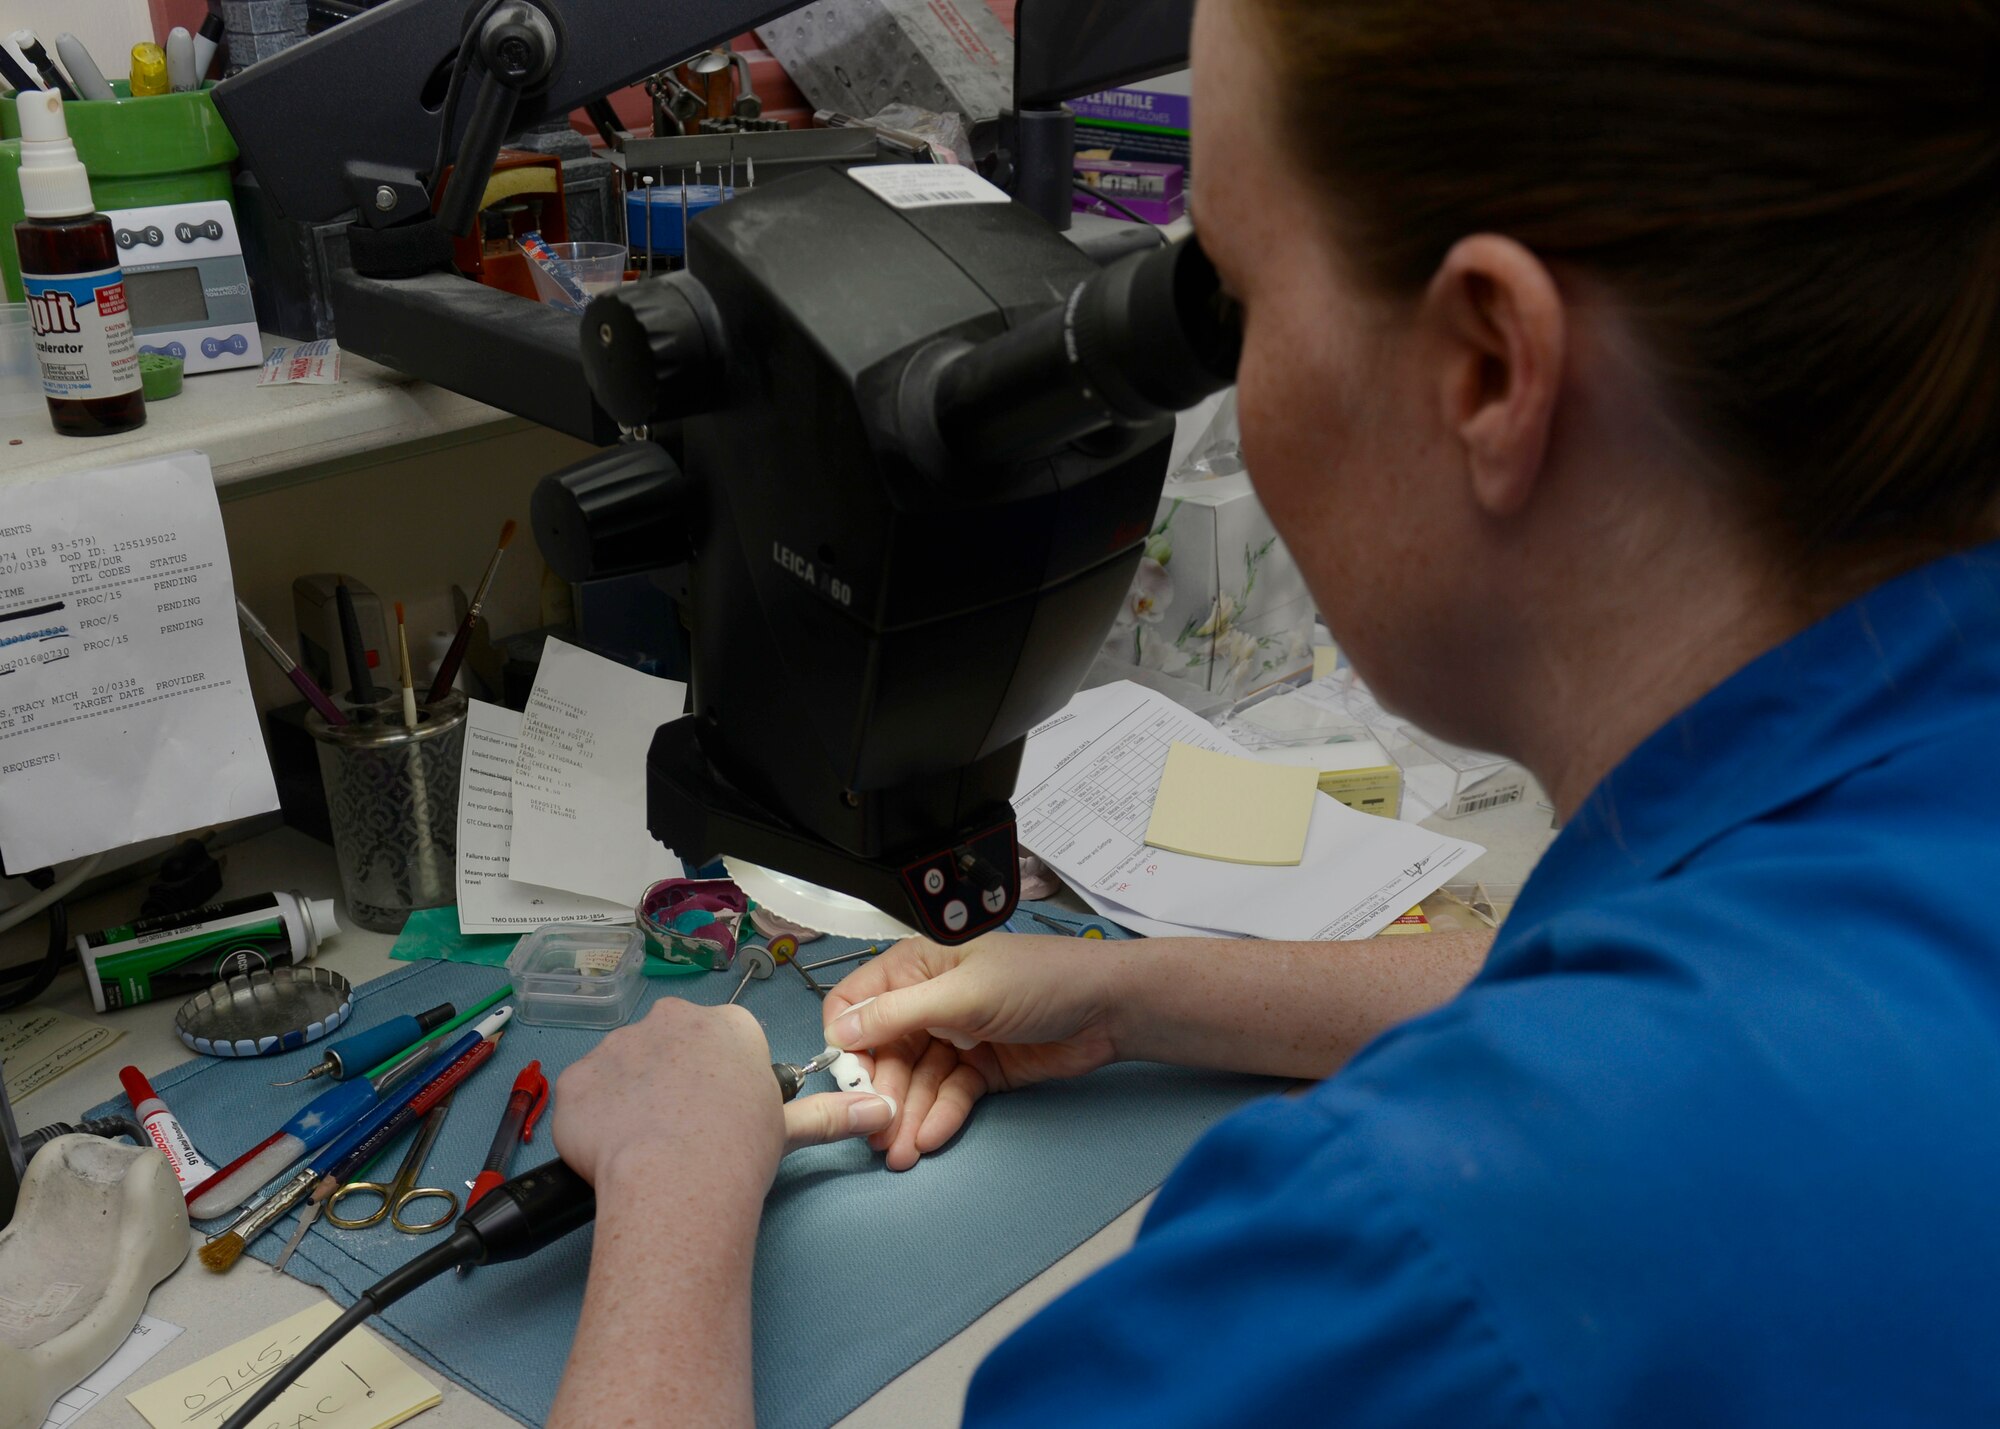 U.S. Air Force Tech. Sgt. Tracy Roberts, 48th Dental Squadron NCOIC, fixed element, works on a surgical dental guide at Royal Air Force Lakenheath, England, July 13. After receiving the guides, the dental lab smooths down any rough spots before use in surgery. (U.S. Air Force photo/Airman 1st Class Abby L. Finkel) 